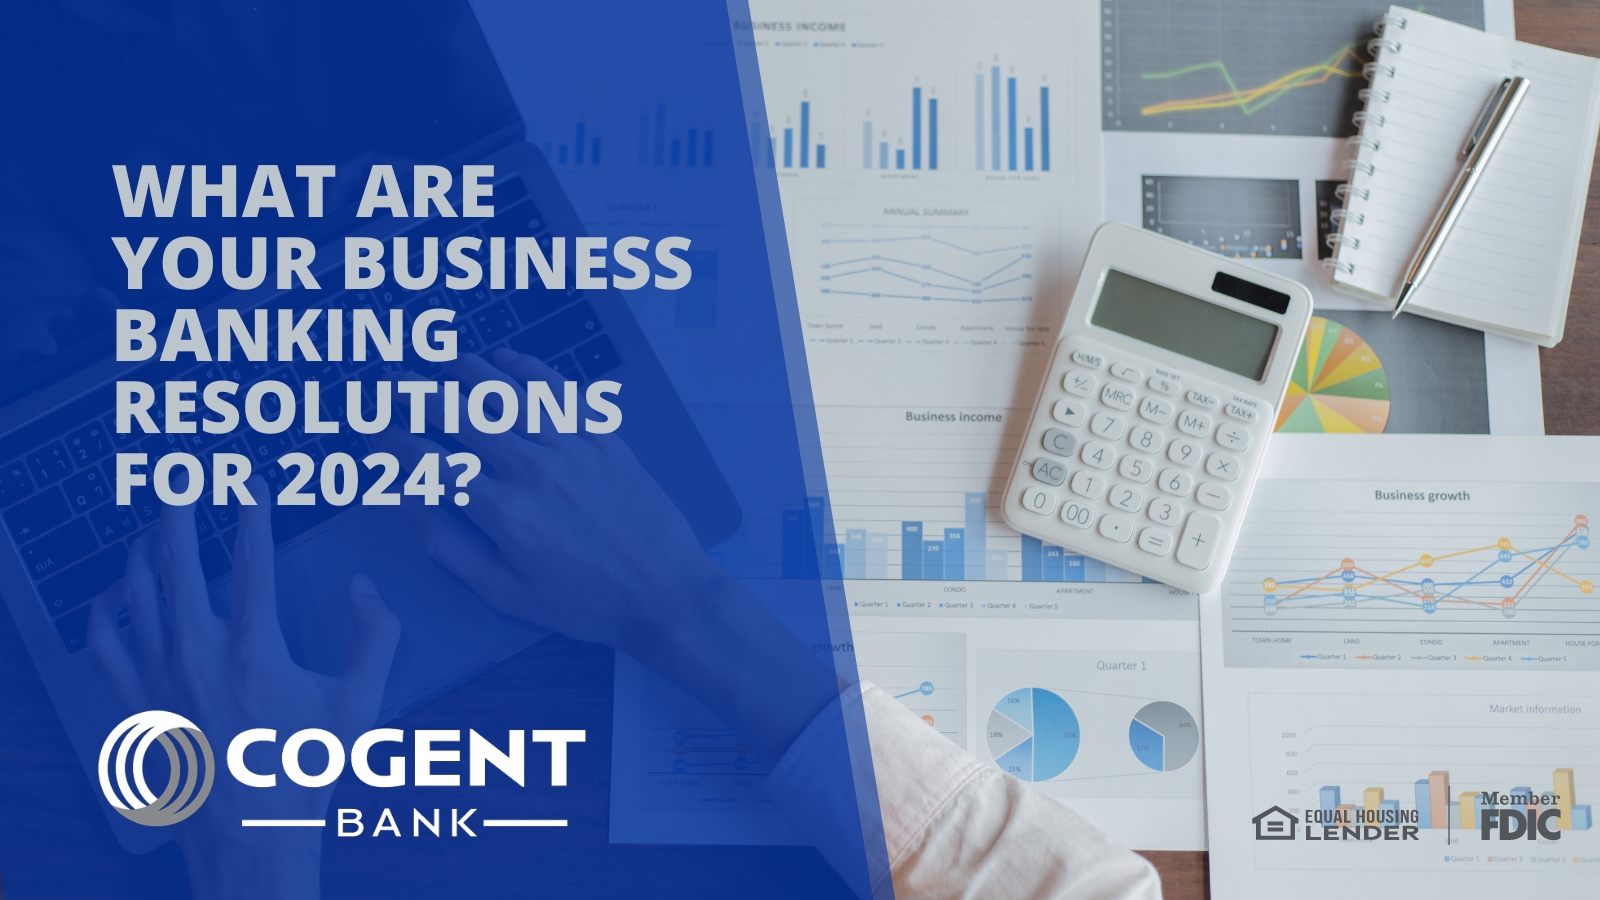 What Are Your Business Banking Resolutions for 2024?